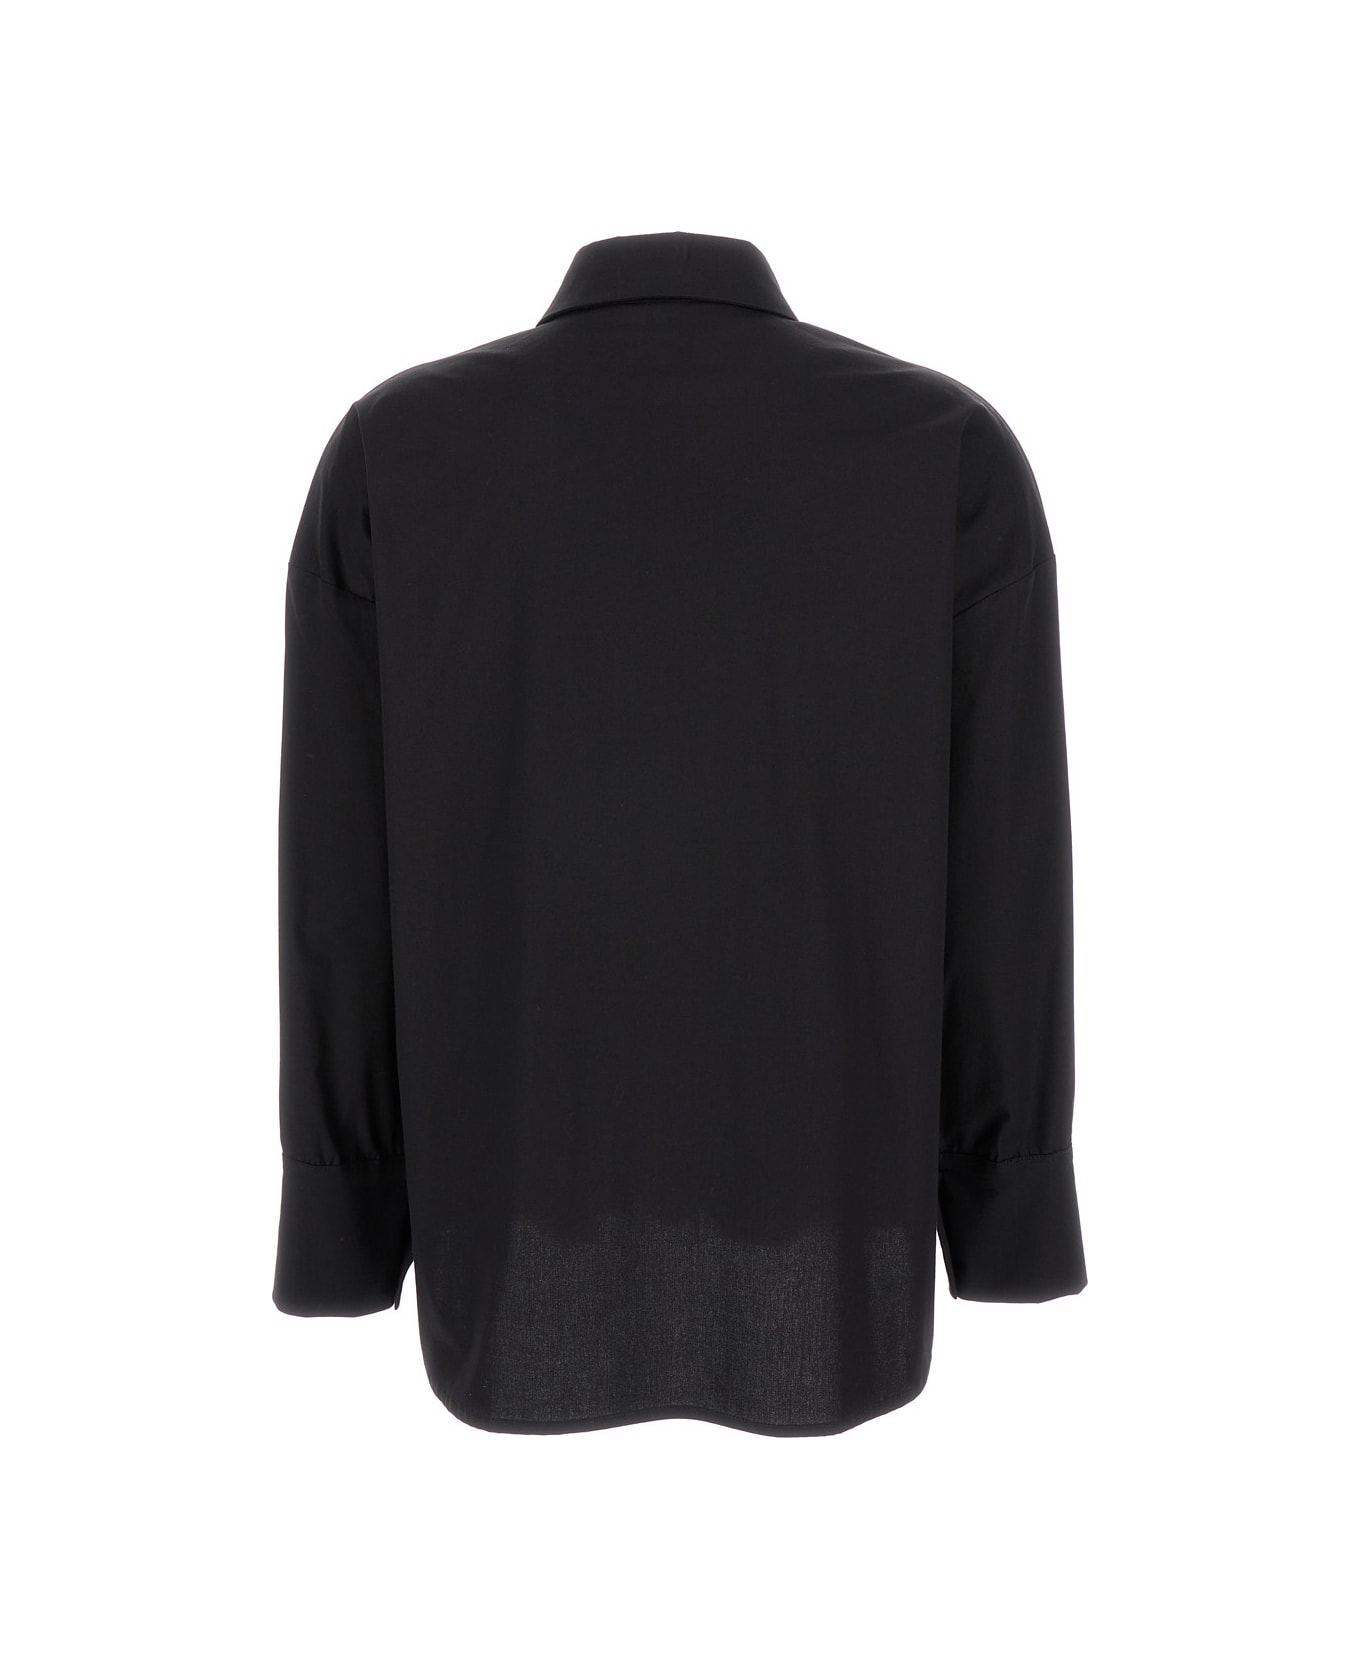 Federica Tosi Black Long Sleeves Shirt In Cotton Blend Woman - Black